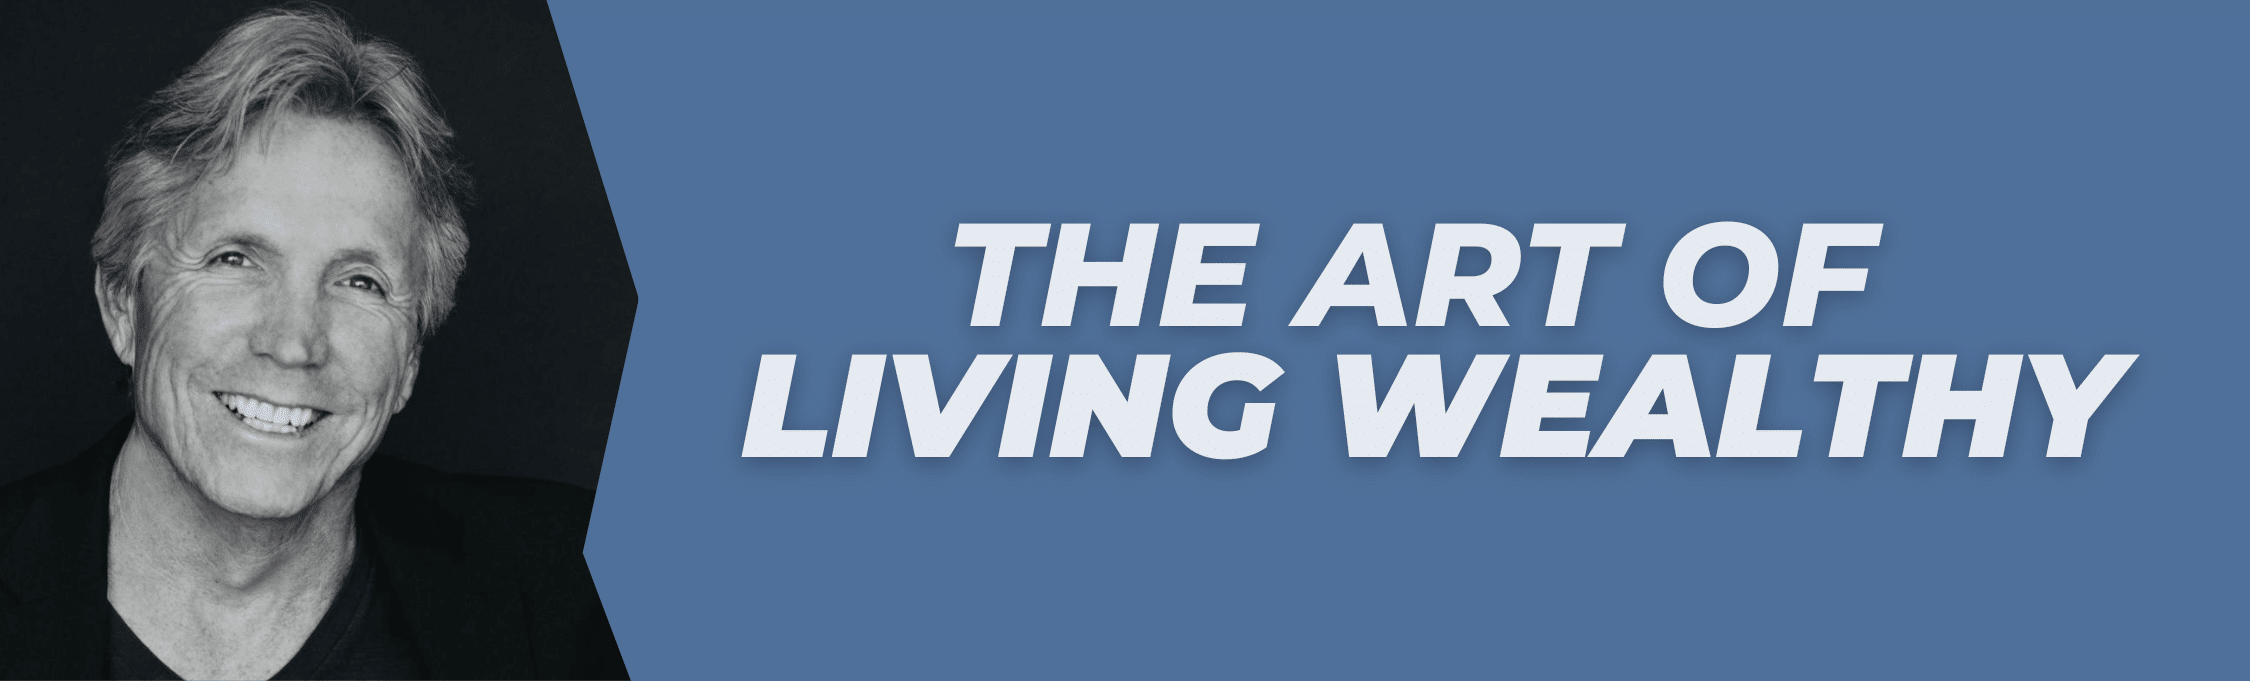 The Art of Living Wealthy